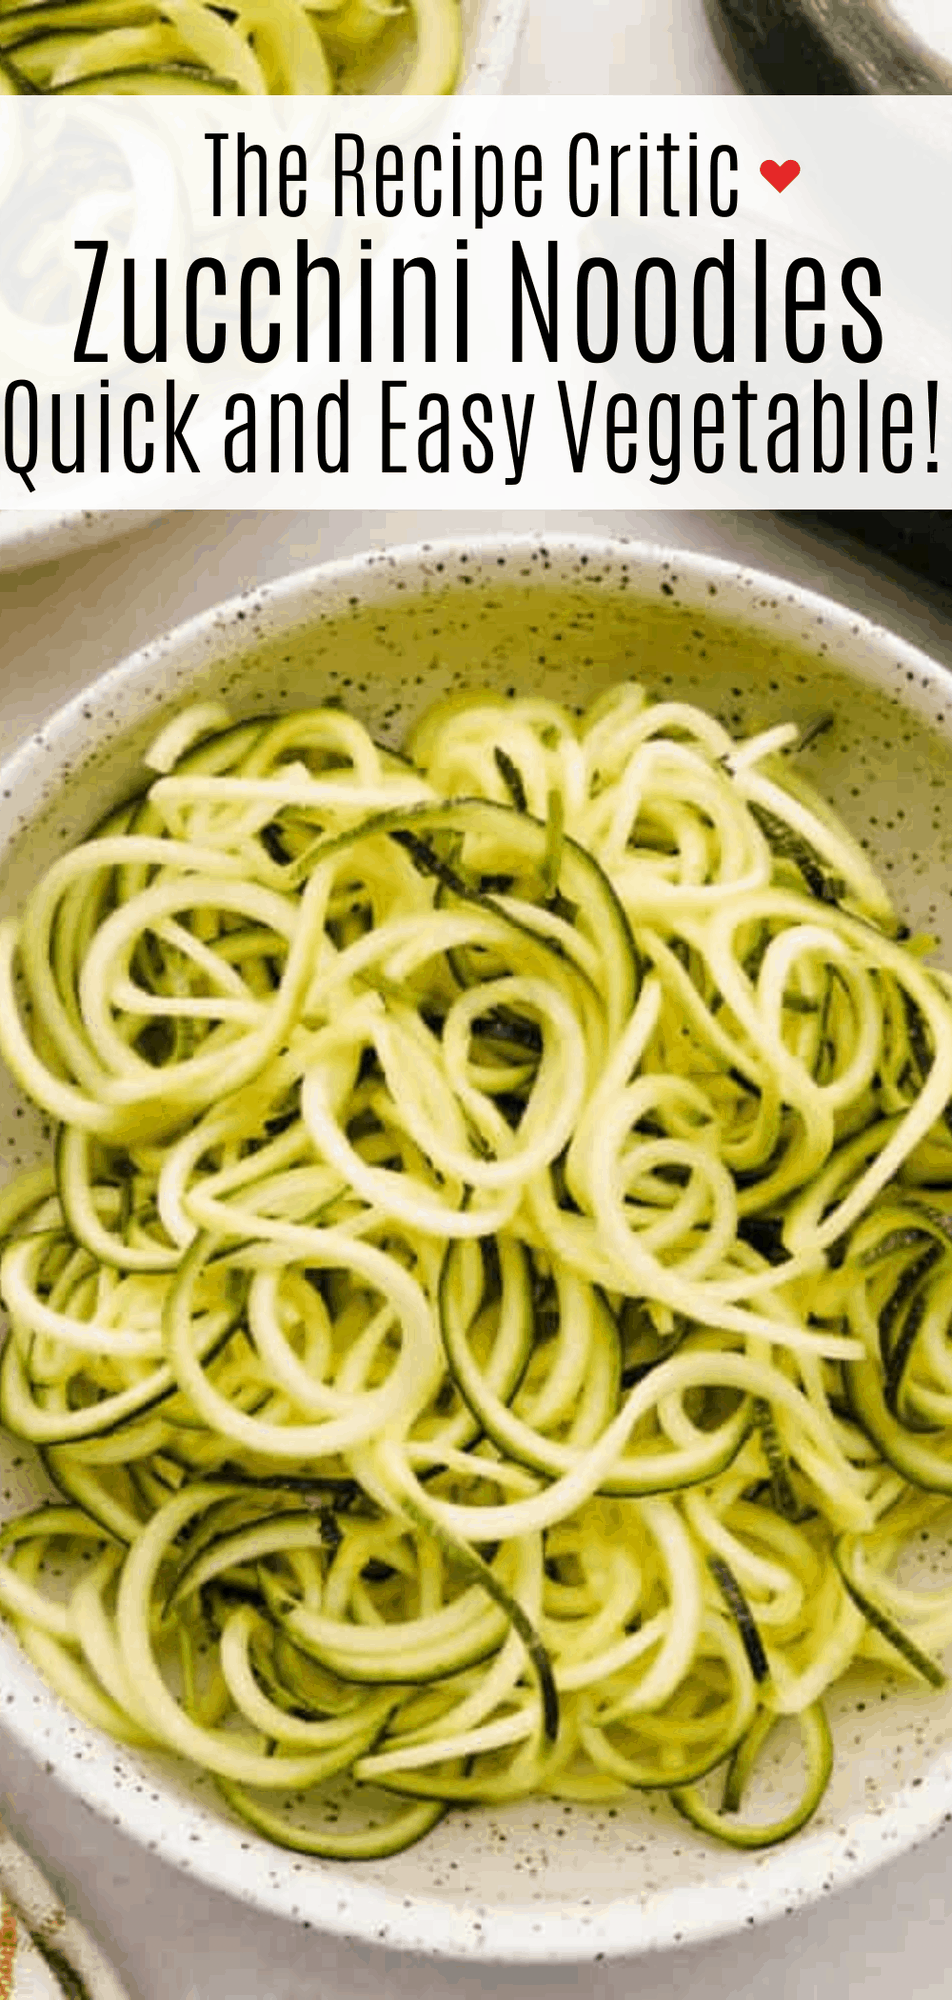 https://therecipecritic.com/wp-content/uploads/2021/08/Zucchini-Noodles-1.png